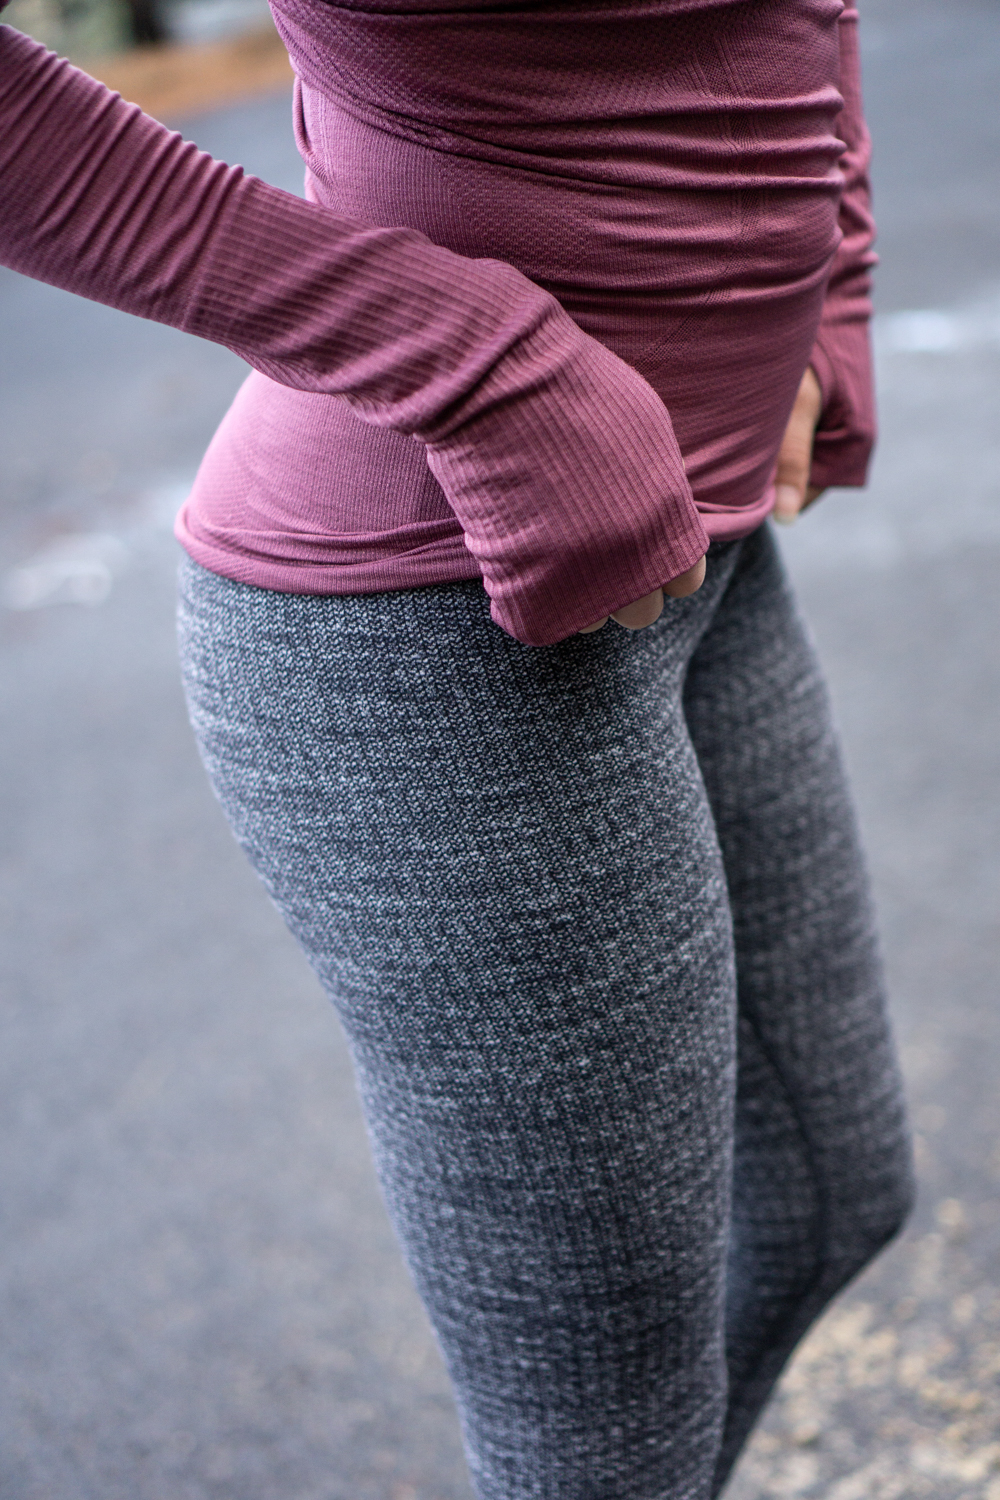 Lululemon tight stuff tight review wine berry 3 - Agent Athletica